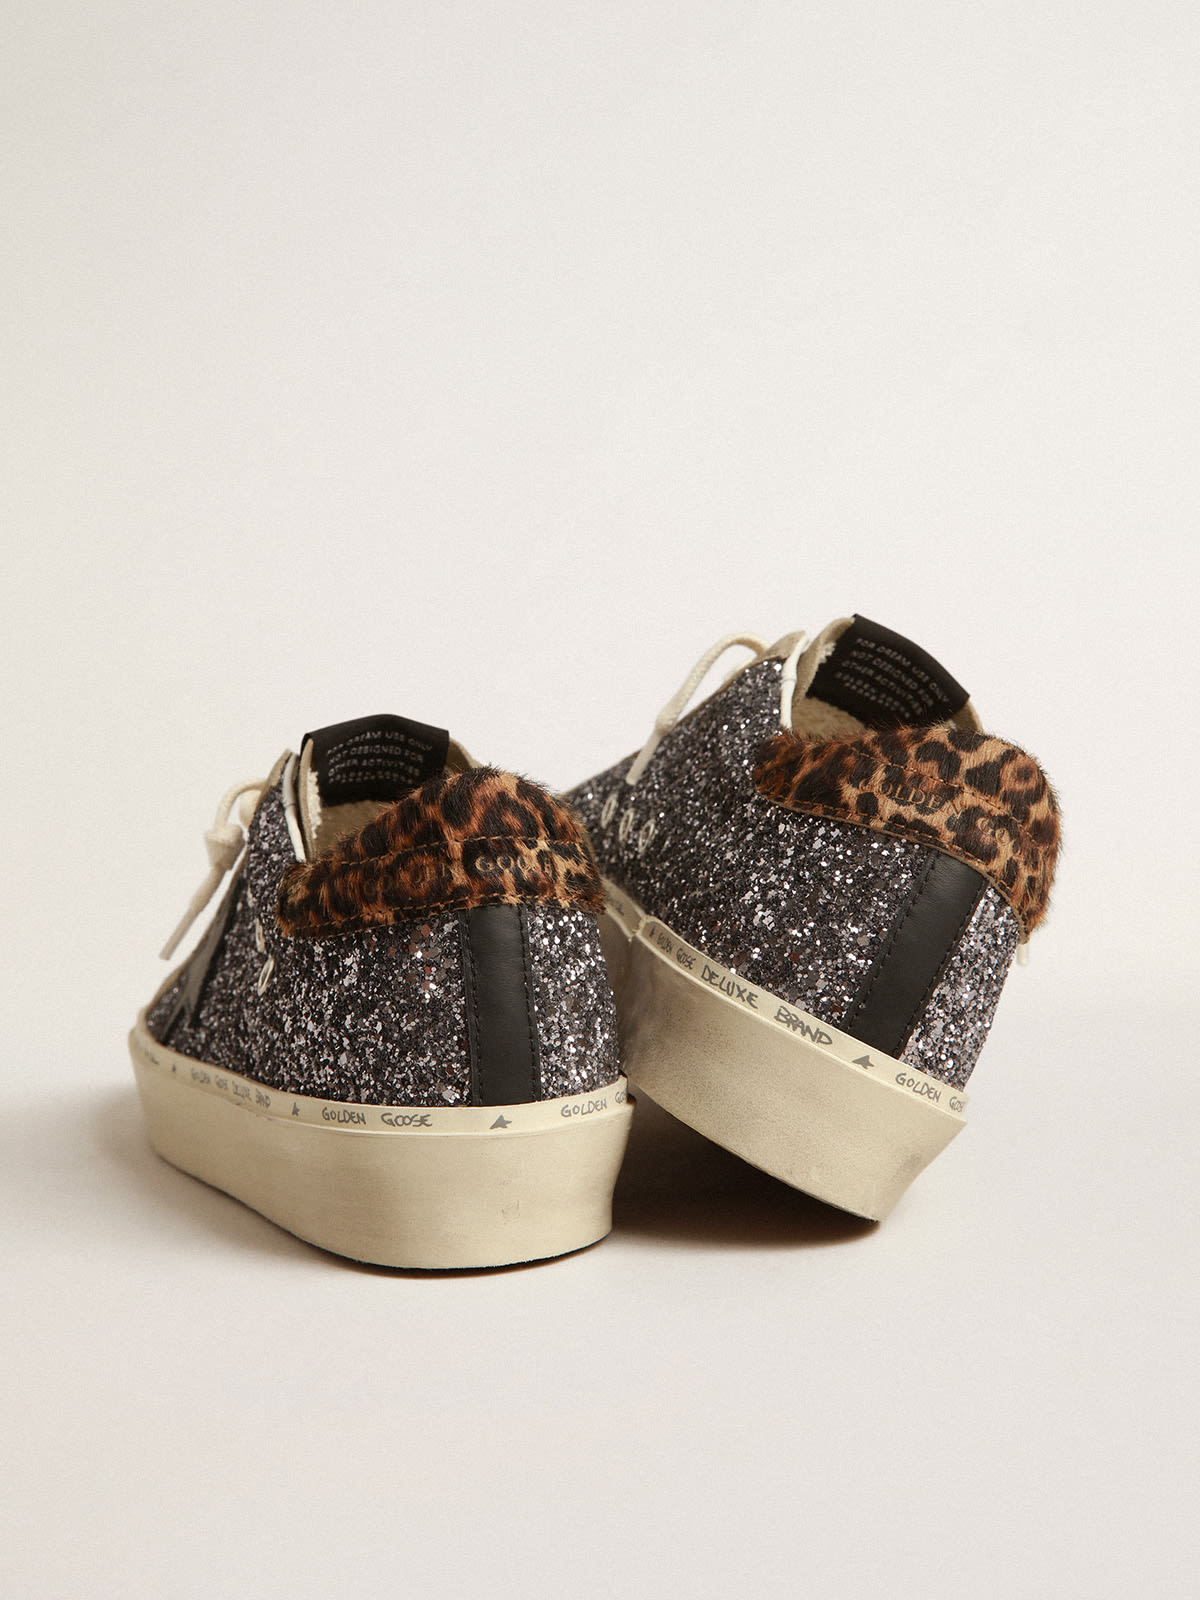 Golden Goose - Hi Star in dark gray glitter with a black leather star in 